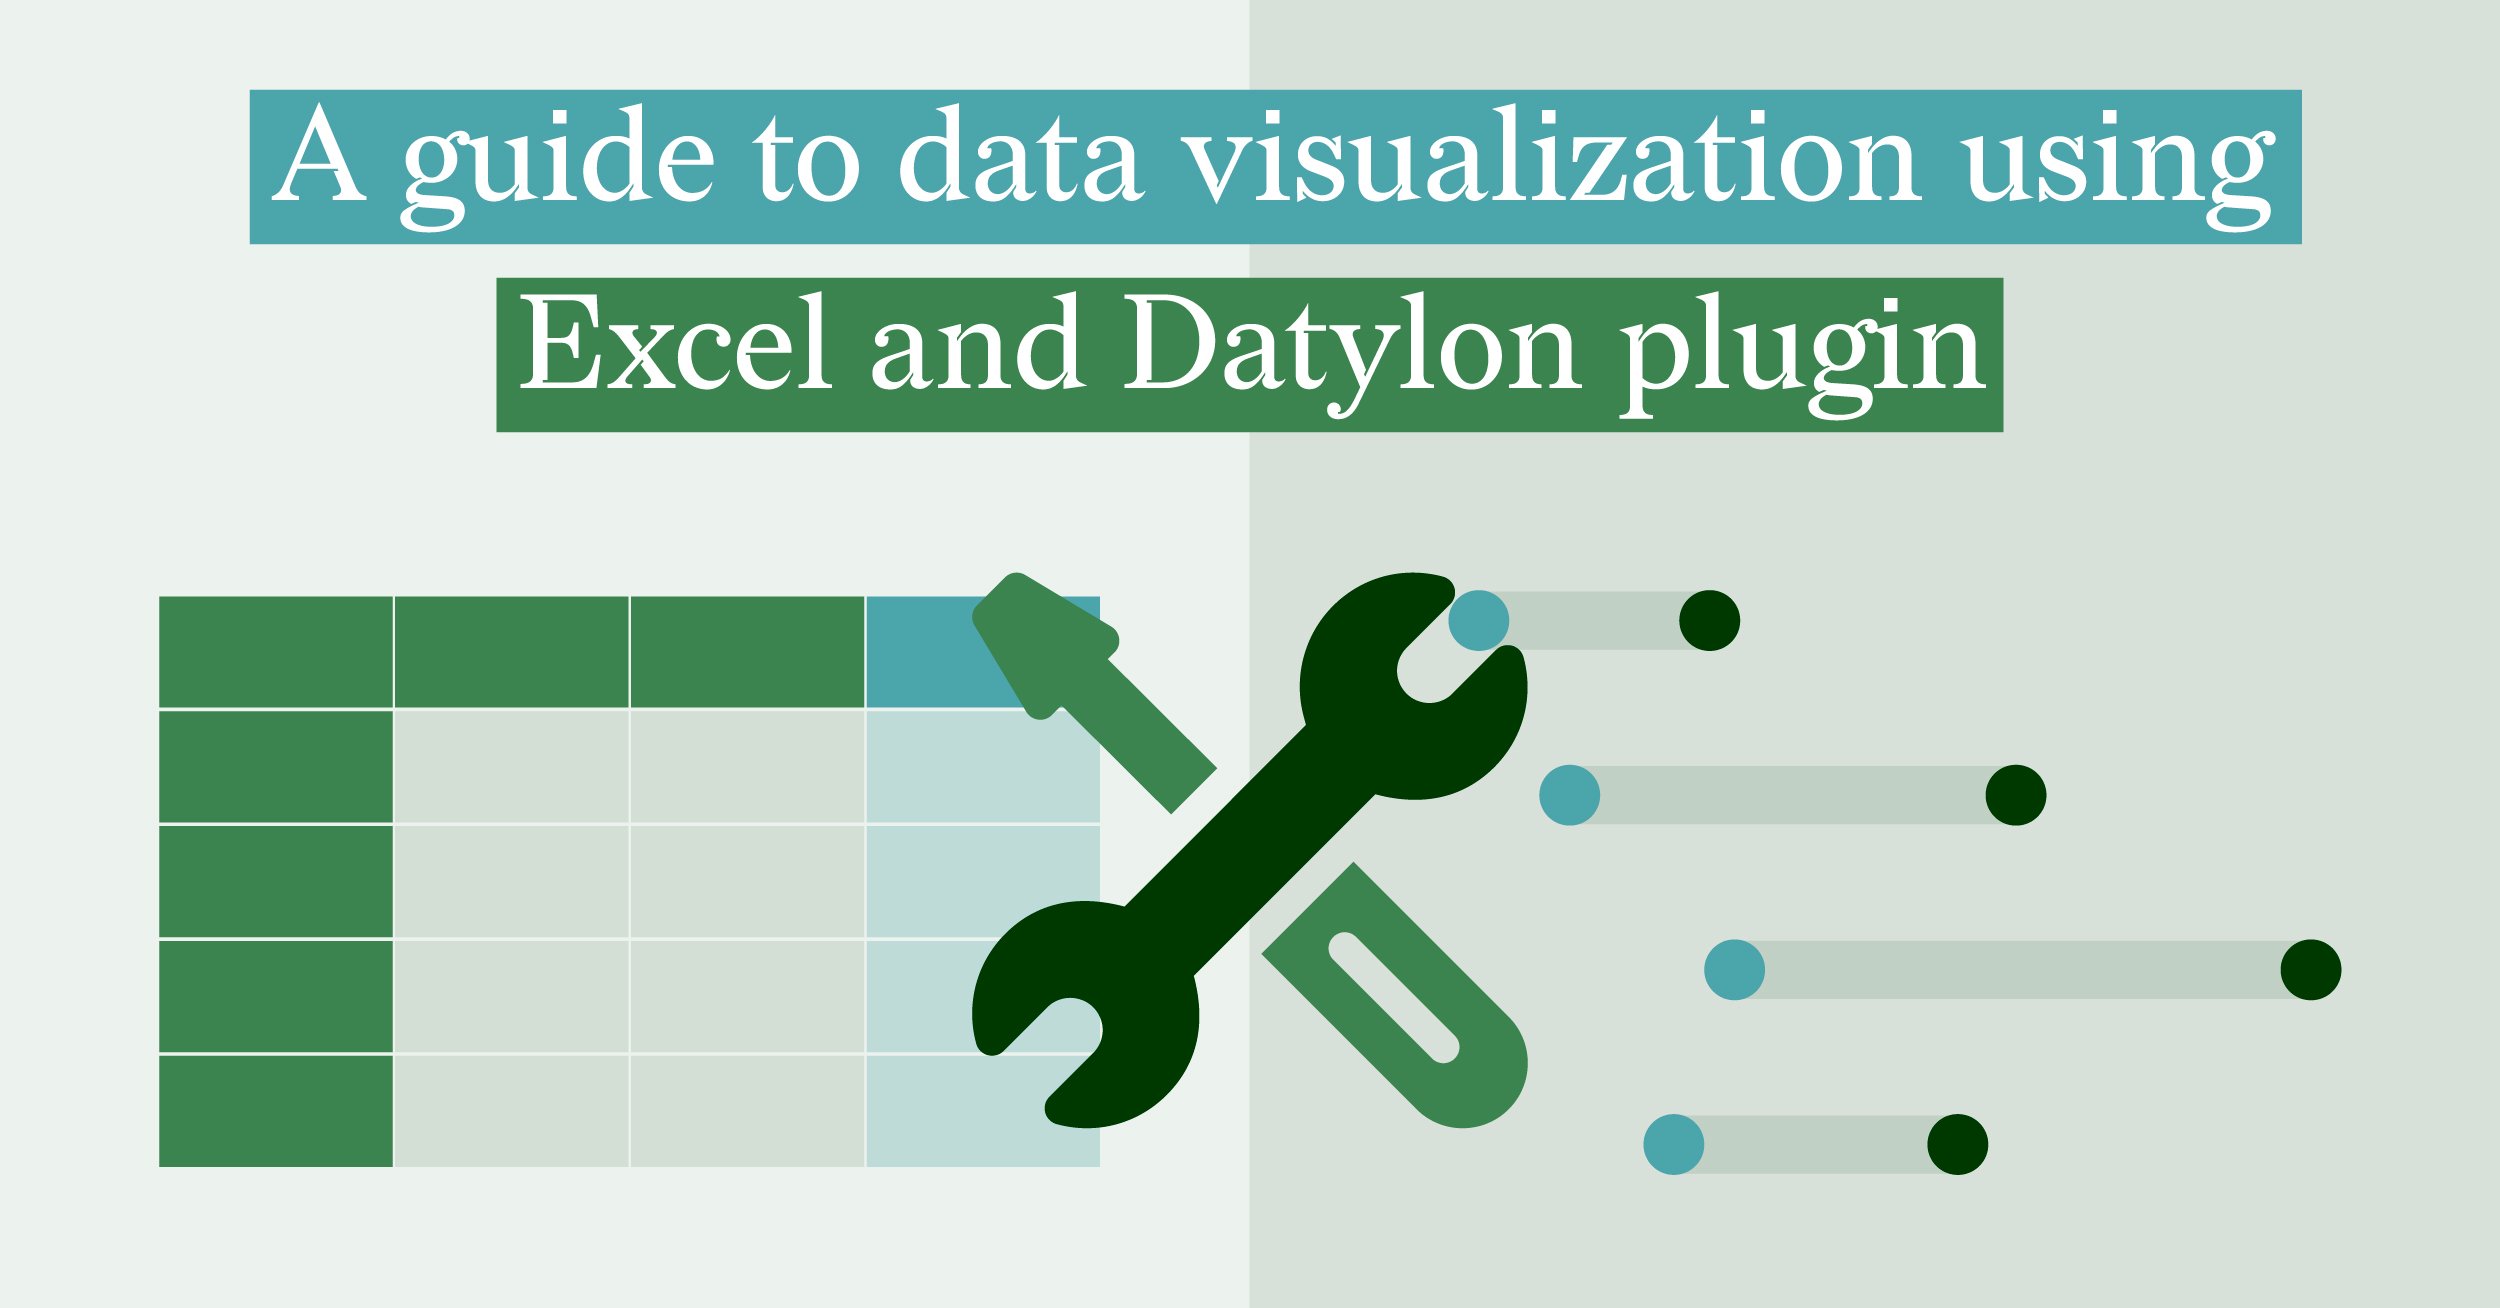 datylon-blog-a-guide-to-data-visualization-using-excel-and-datylon-plugin-featured-image